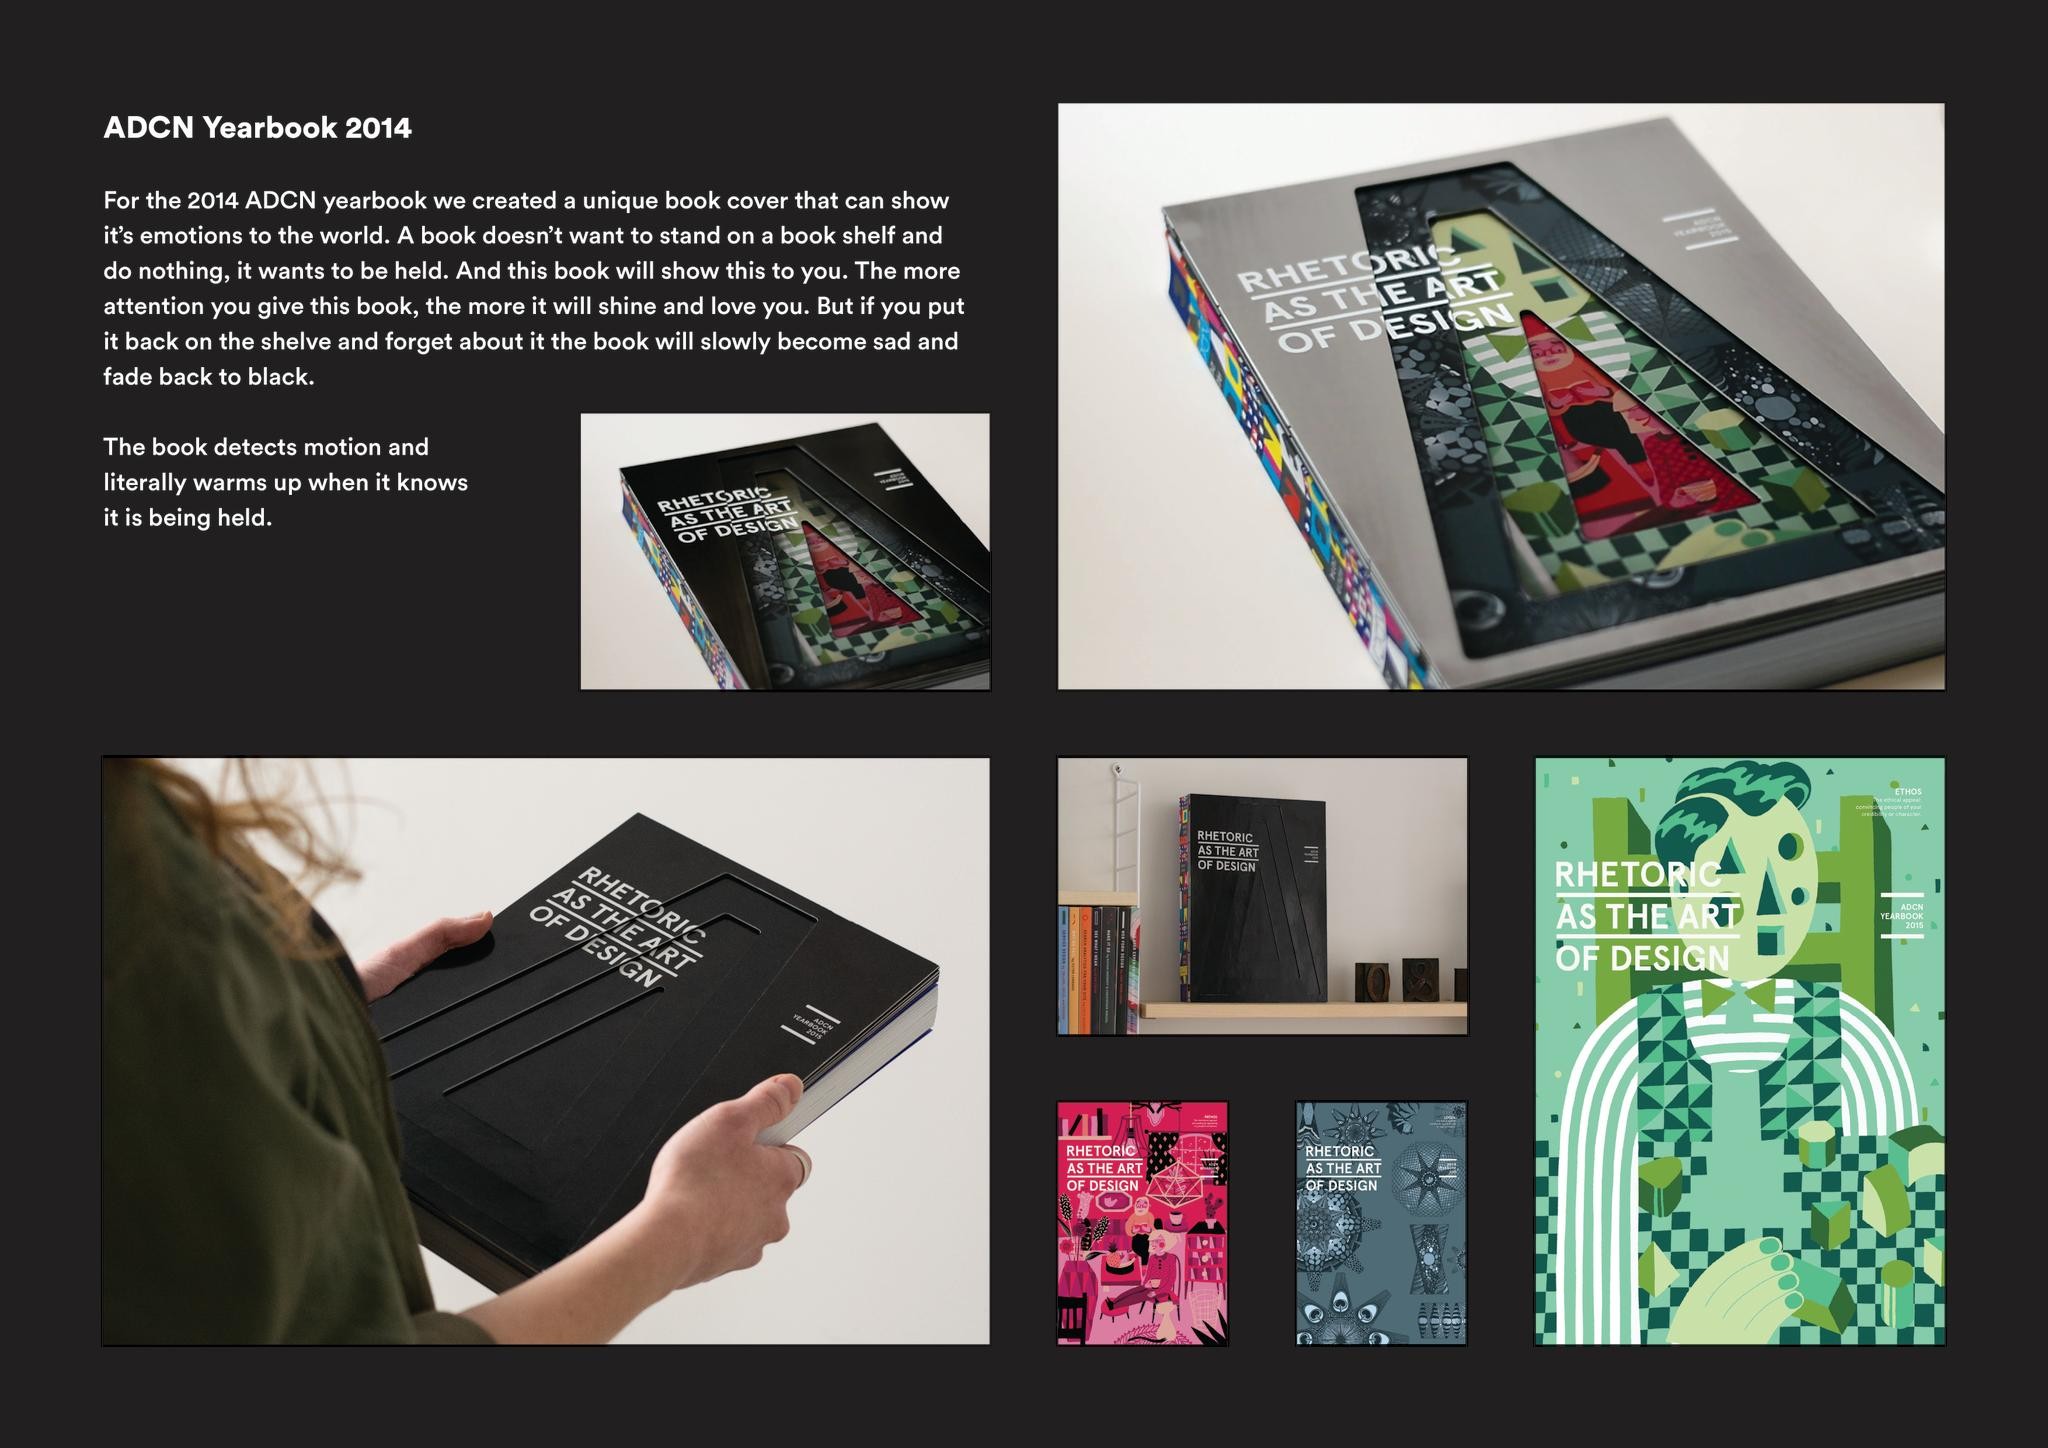 ADCN YEARBOOK 2014